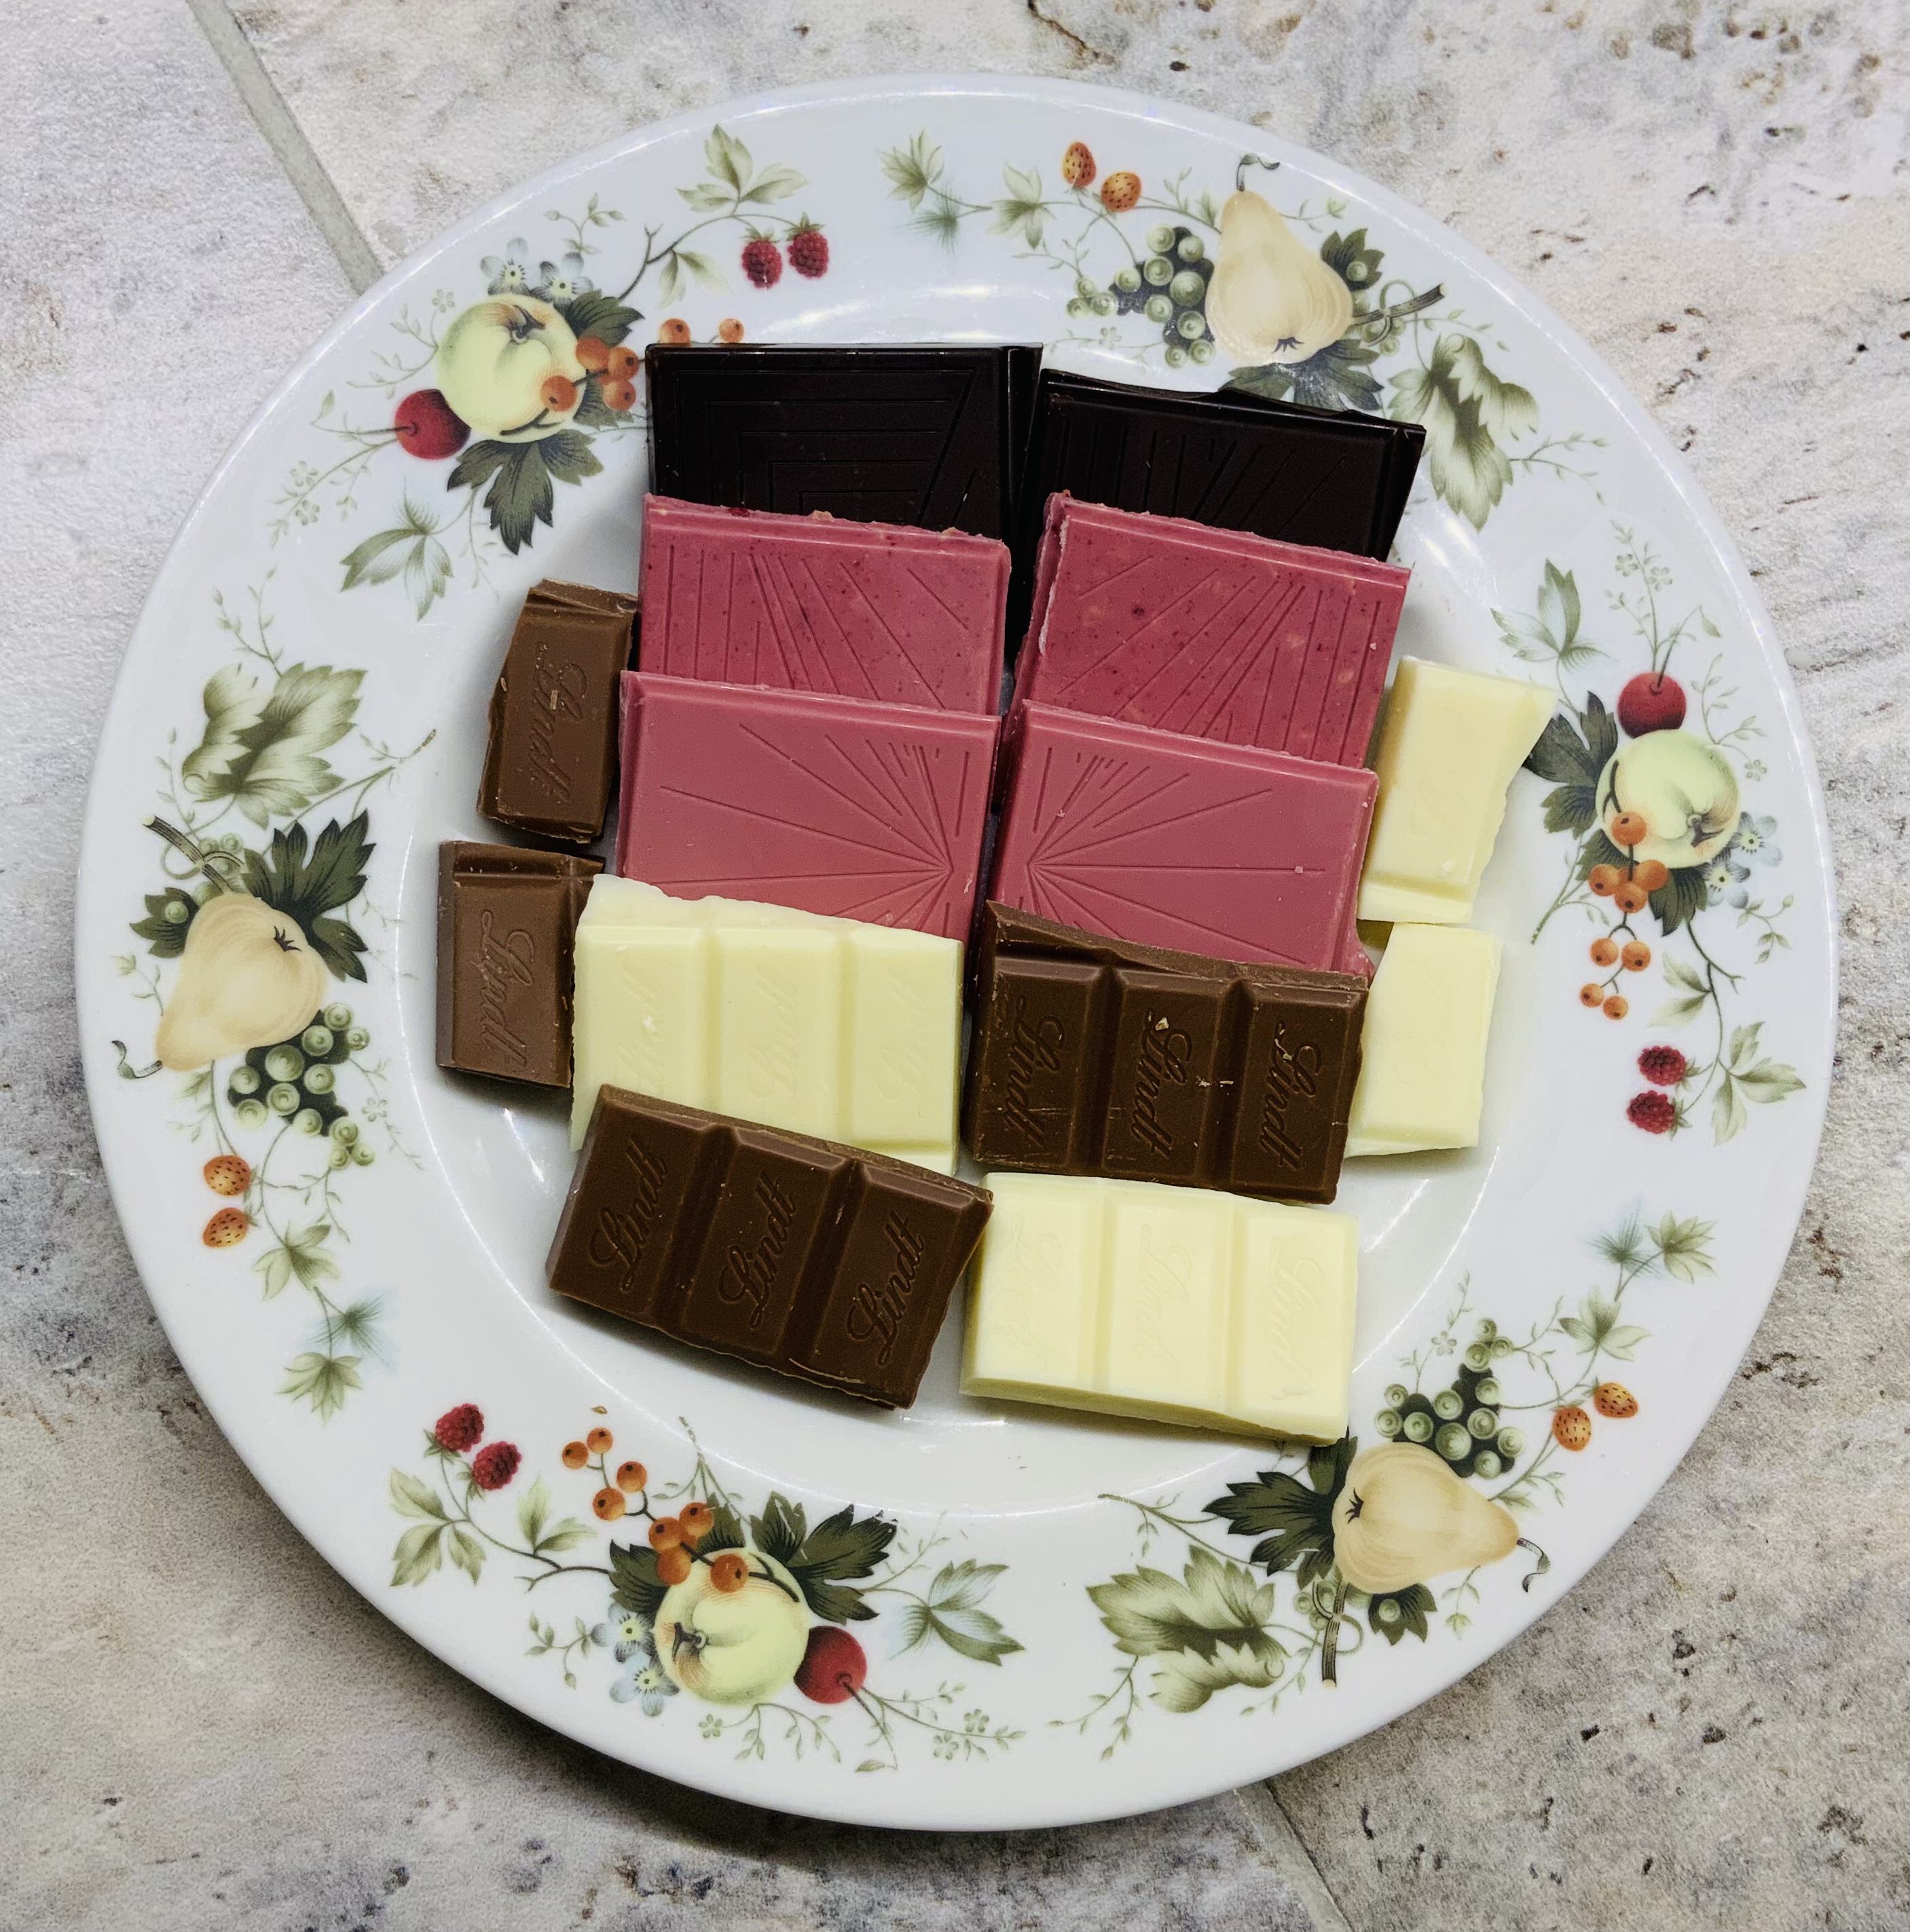 Pieces of dark, ruby, white and milk chocolate on a plate.